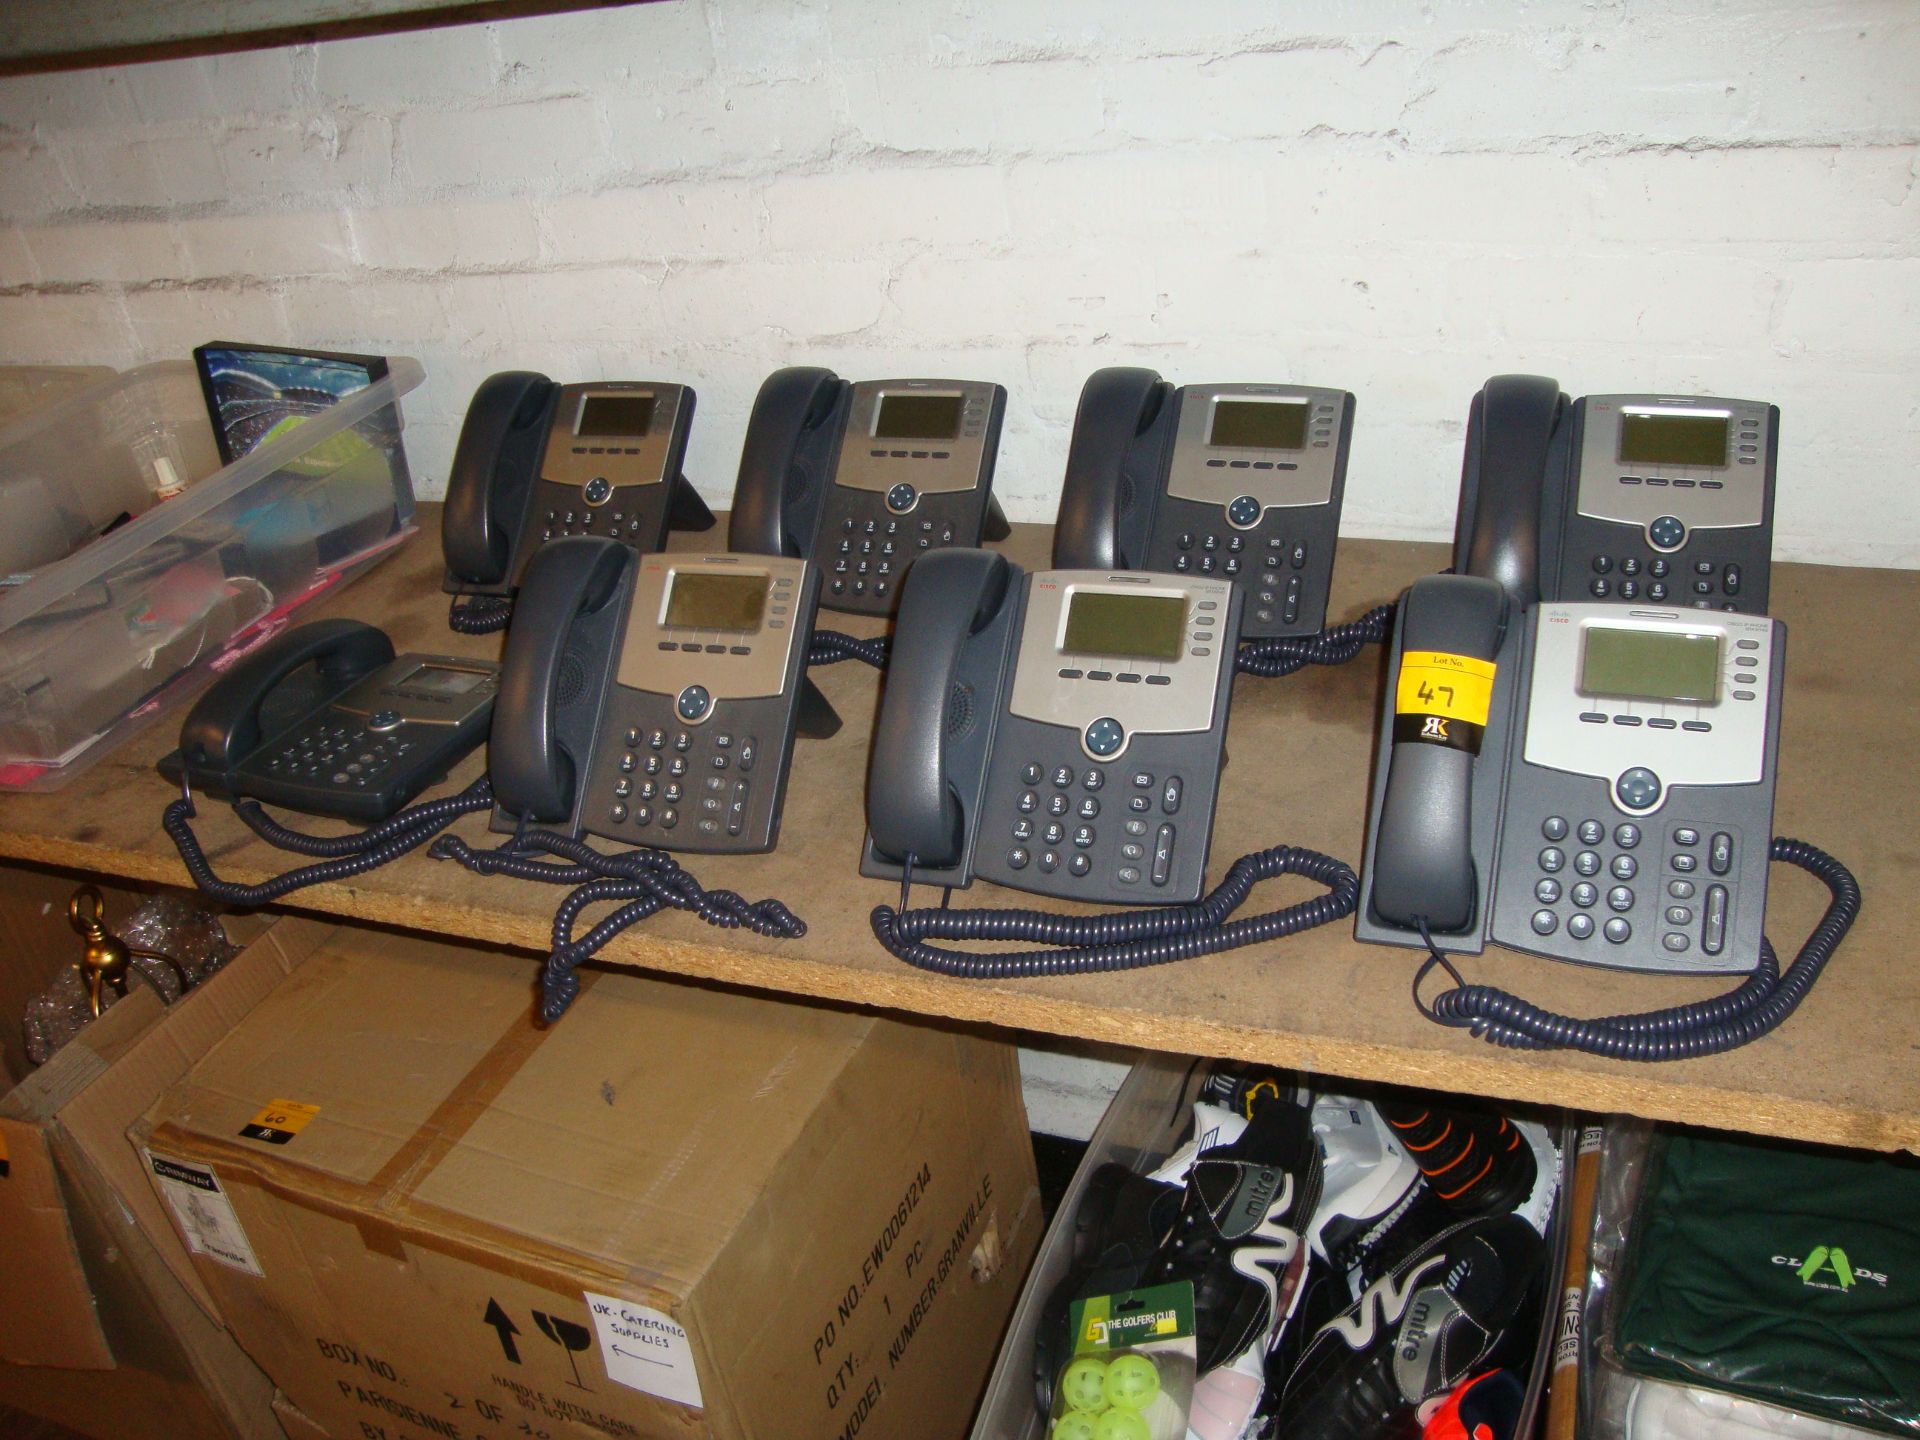 8 off Cisco model SPA504G IP telephone handsets NB. One of the handsets does not include the bracket